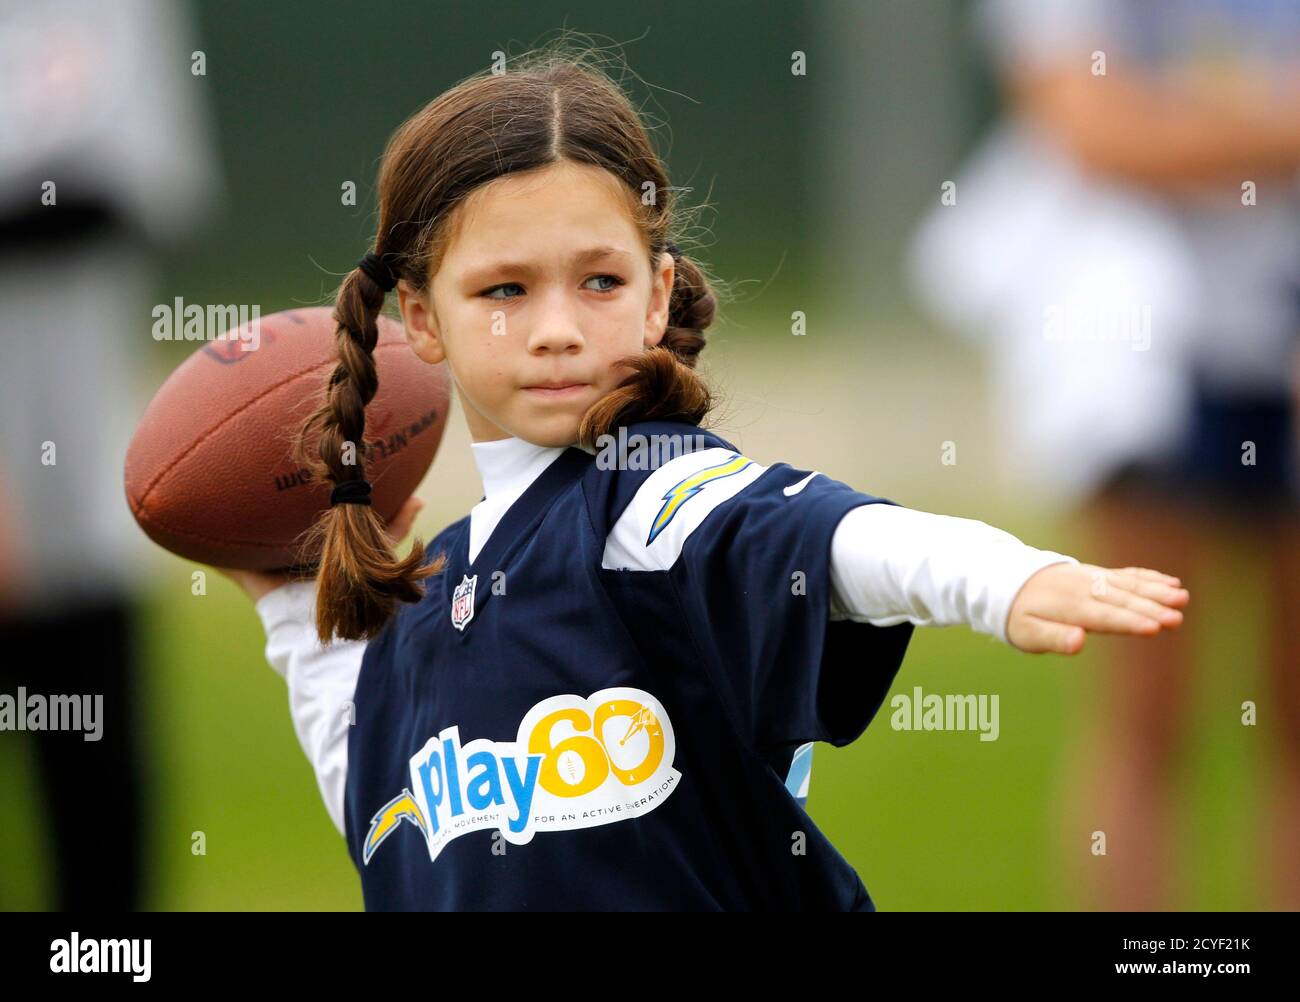 Seven-year-old Megan Johnson of Manhattan Beach throws the ball in the Punt, Pass & Kick competition prior to the Cincinnati Bengals playing against the San Diego Chargers in their NFL football game in San Diego, California December 2, 2012. Punt, Pass & Kick competition in five age gendered groups with the top scorer in each group crowned team champion, the top four scorers from all the teams compete for the National Championships to be held during an NFC playoff game.   REUTERS/Alex Gallardo (UNITED STATES) Stock Photo